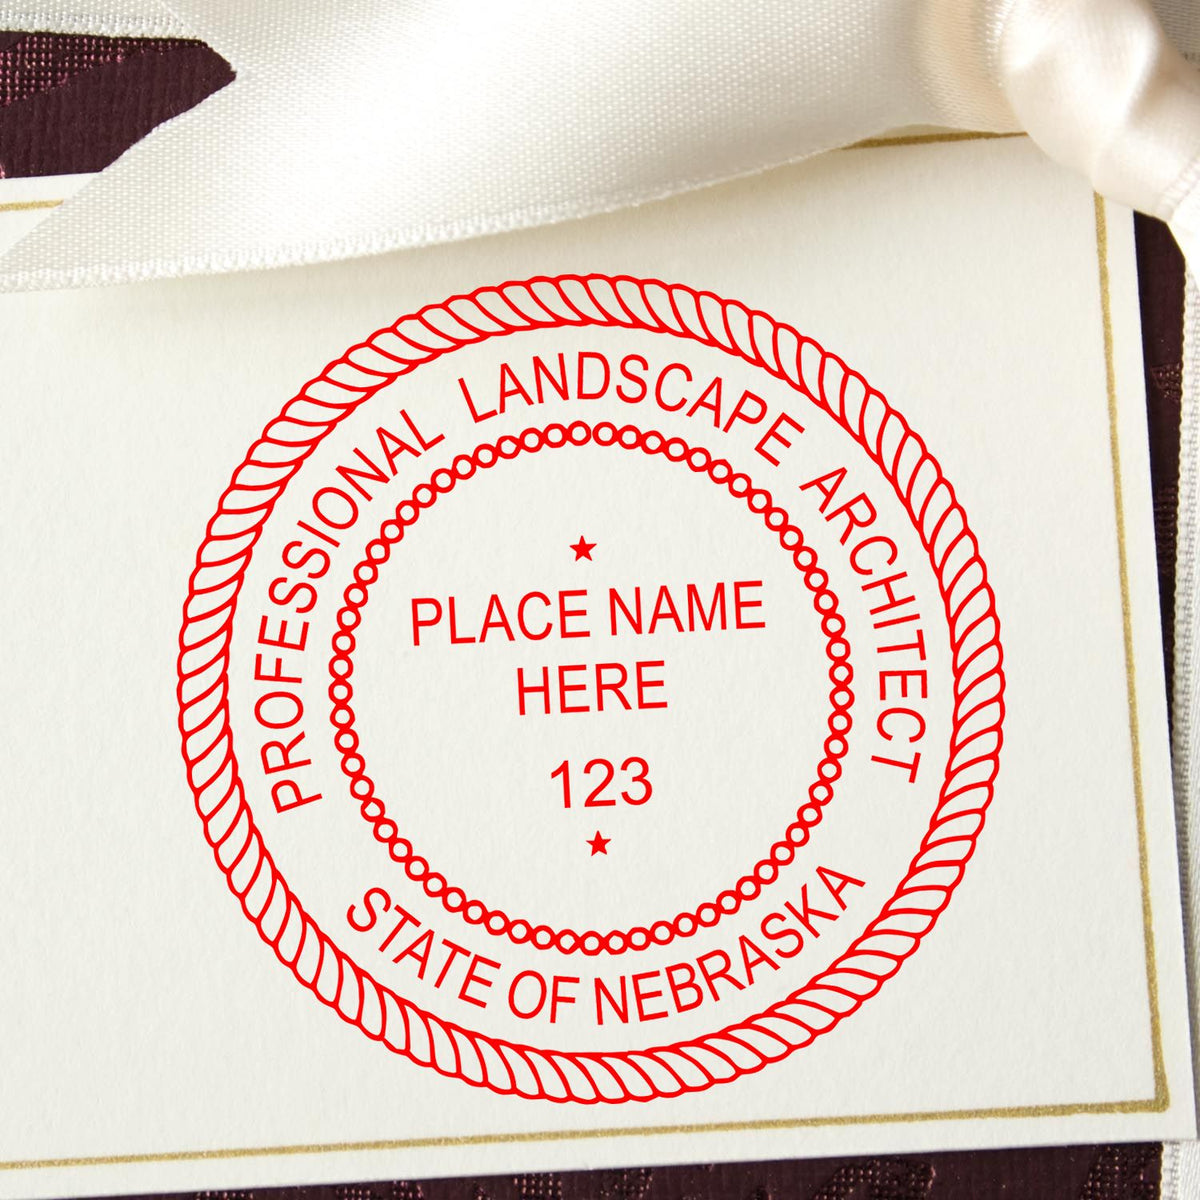 A stamped impression of the Self-Inking Nebraska Landscape Architect Stamp in this stylish lifestyle photo, setting the tone for a unique and personalized product.